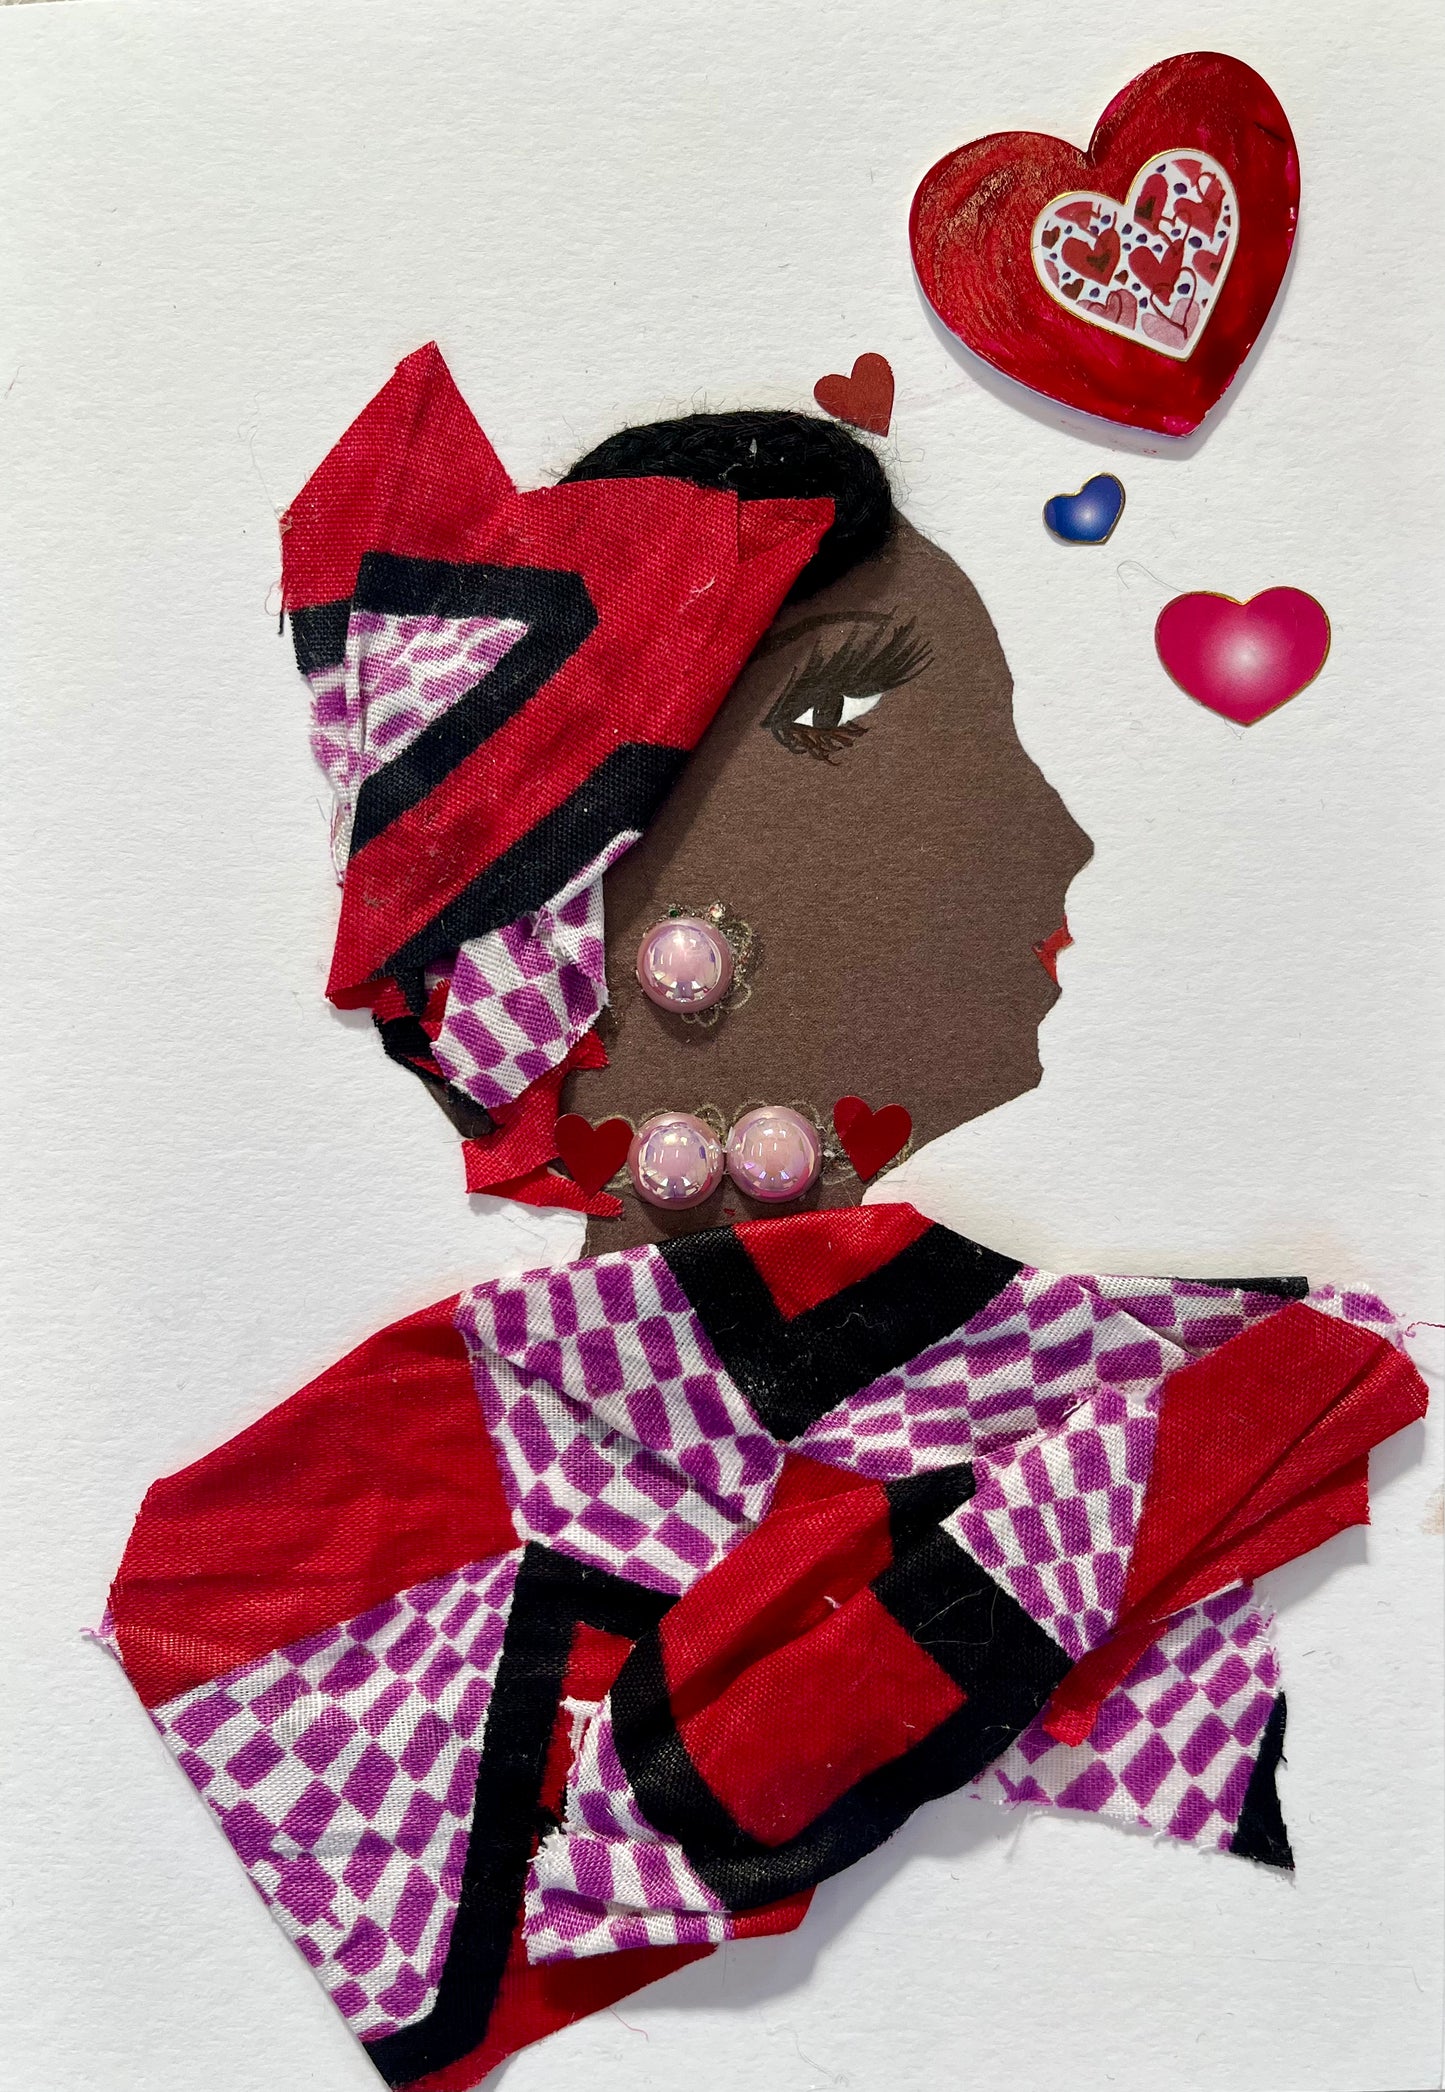 This card shows a woman called Amy. Amy wears a red, purple and white printed blouse with a matching head wrap. She has light pink earrings and a necklace. To the right of her, there is a small red heart, purple heart and pink heart. There is a bigger red heart as well. 